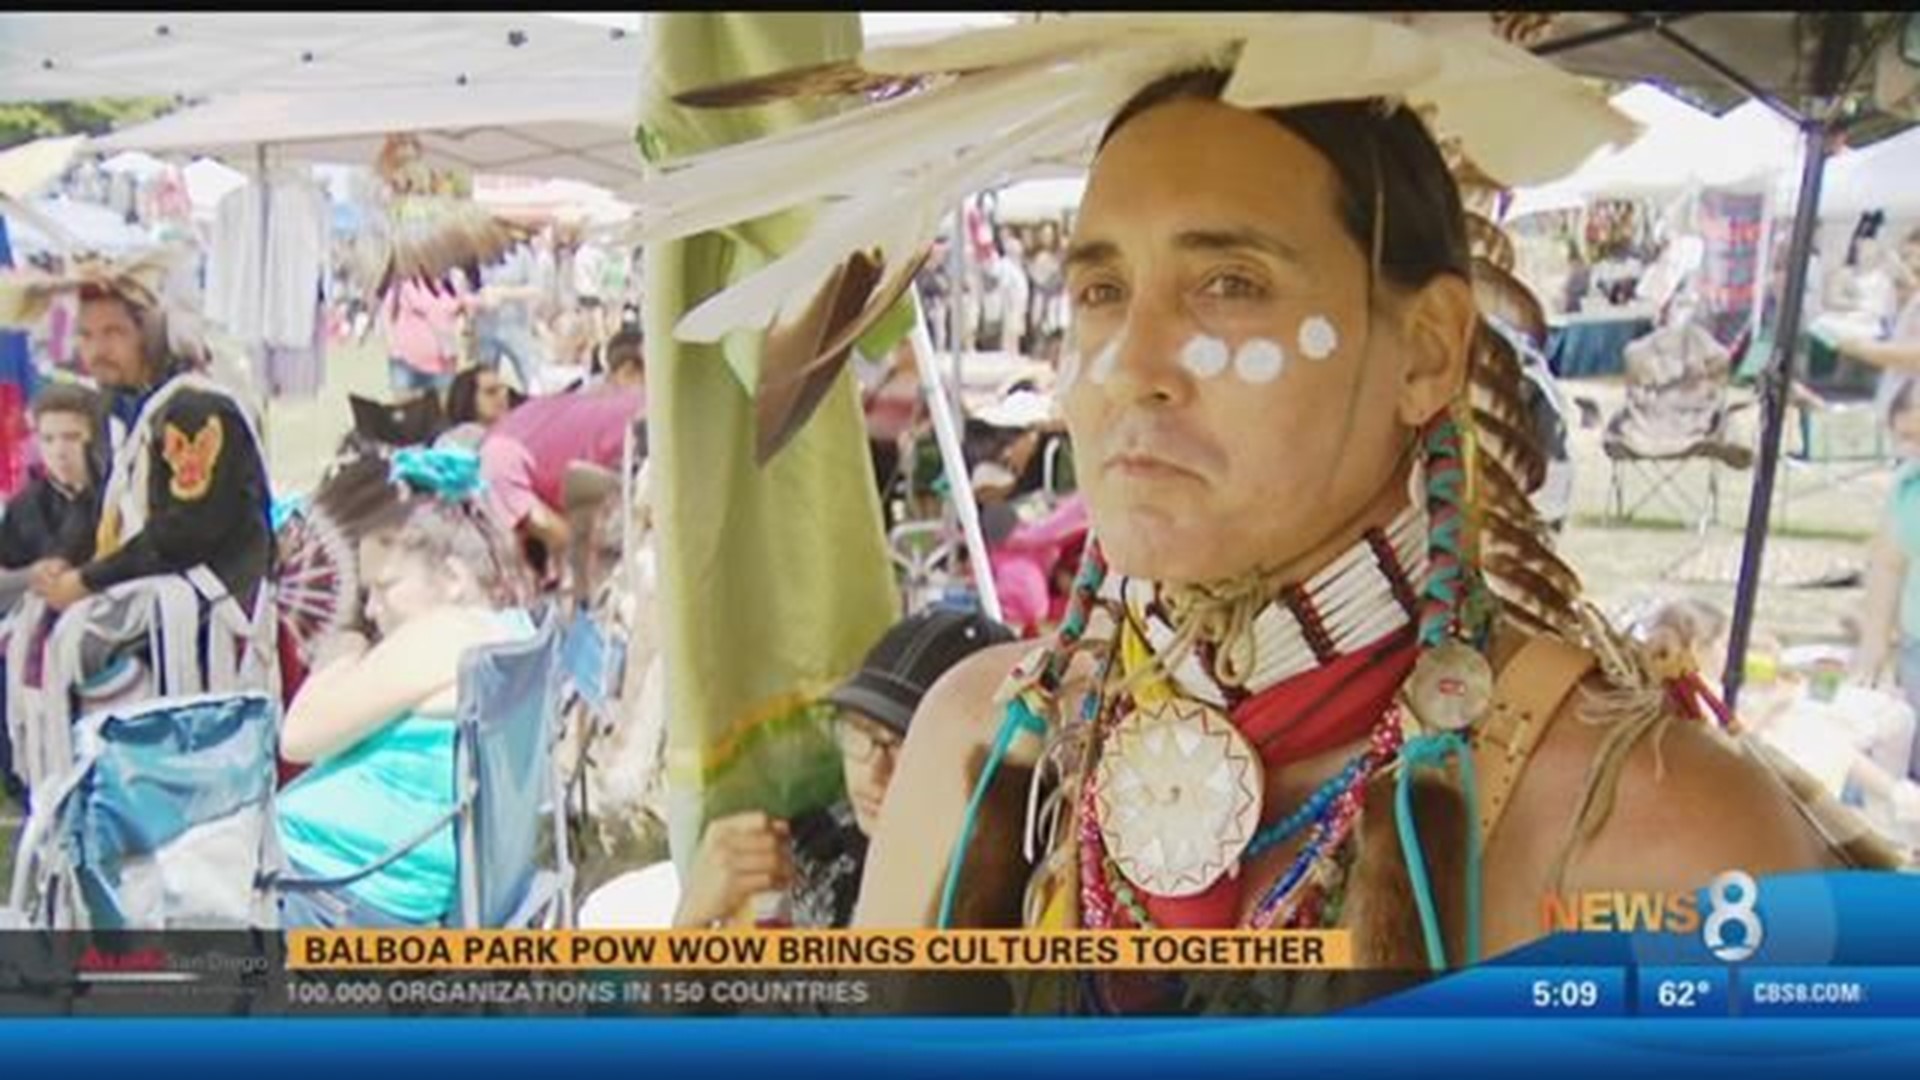 Balboa Park Pow Wow brings cultures together